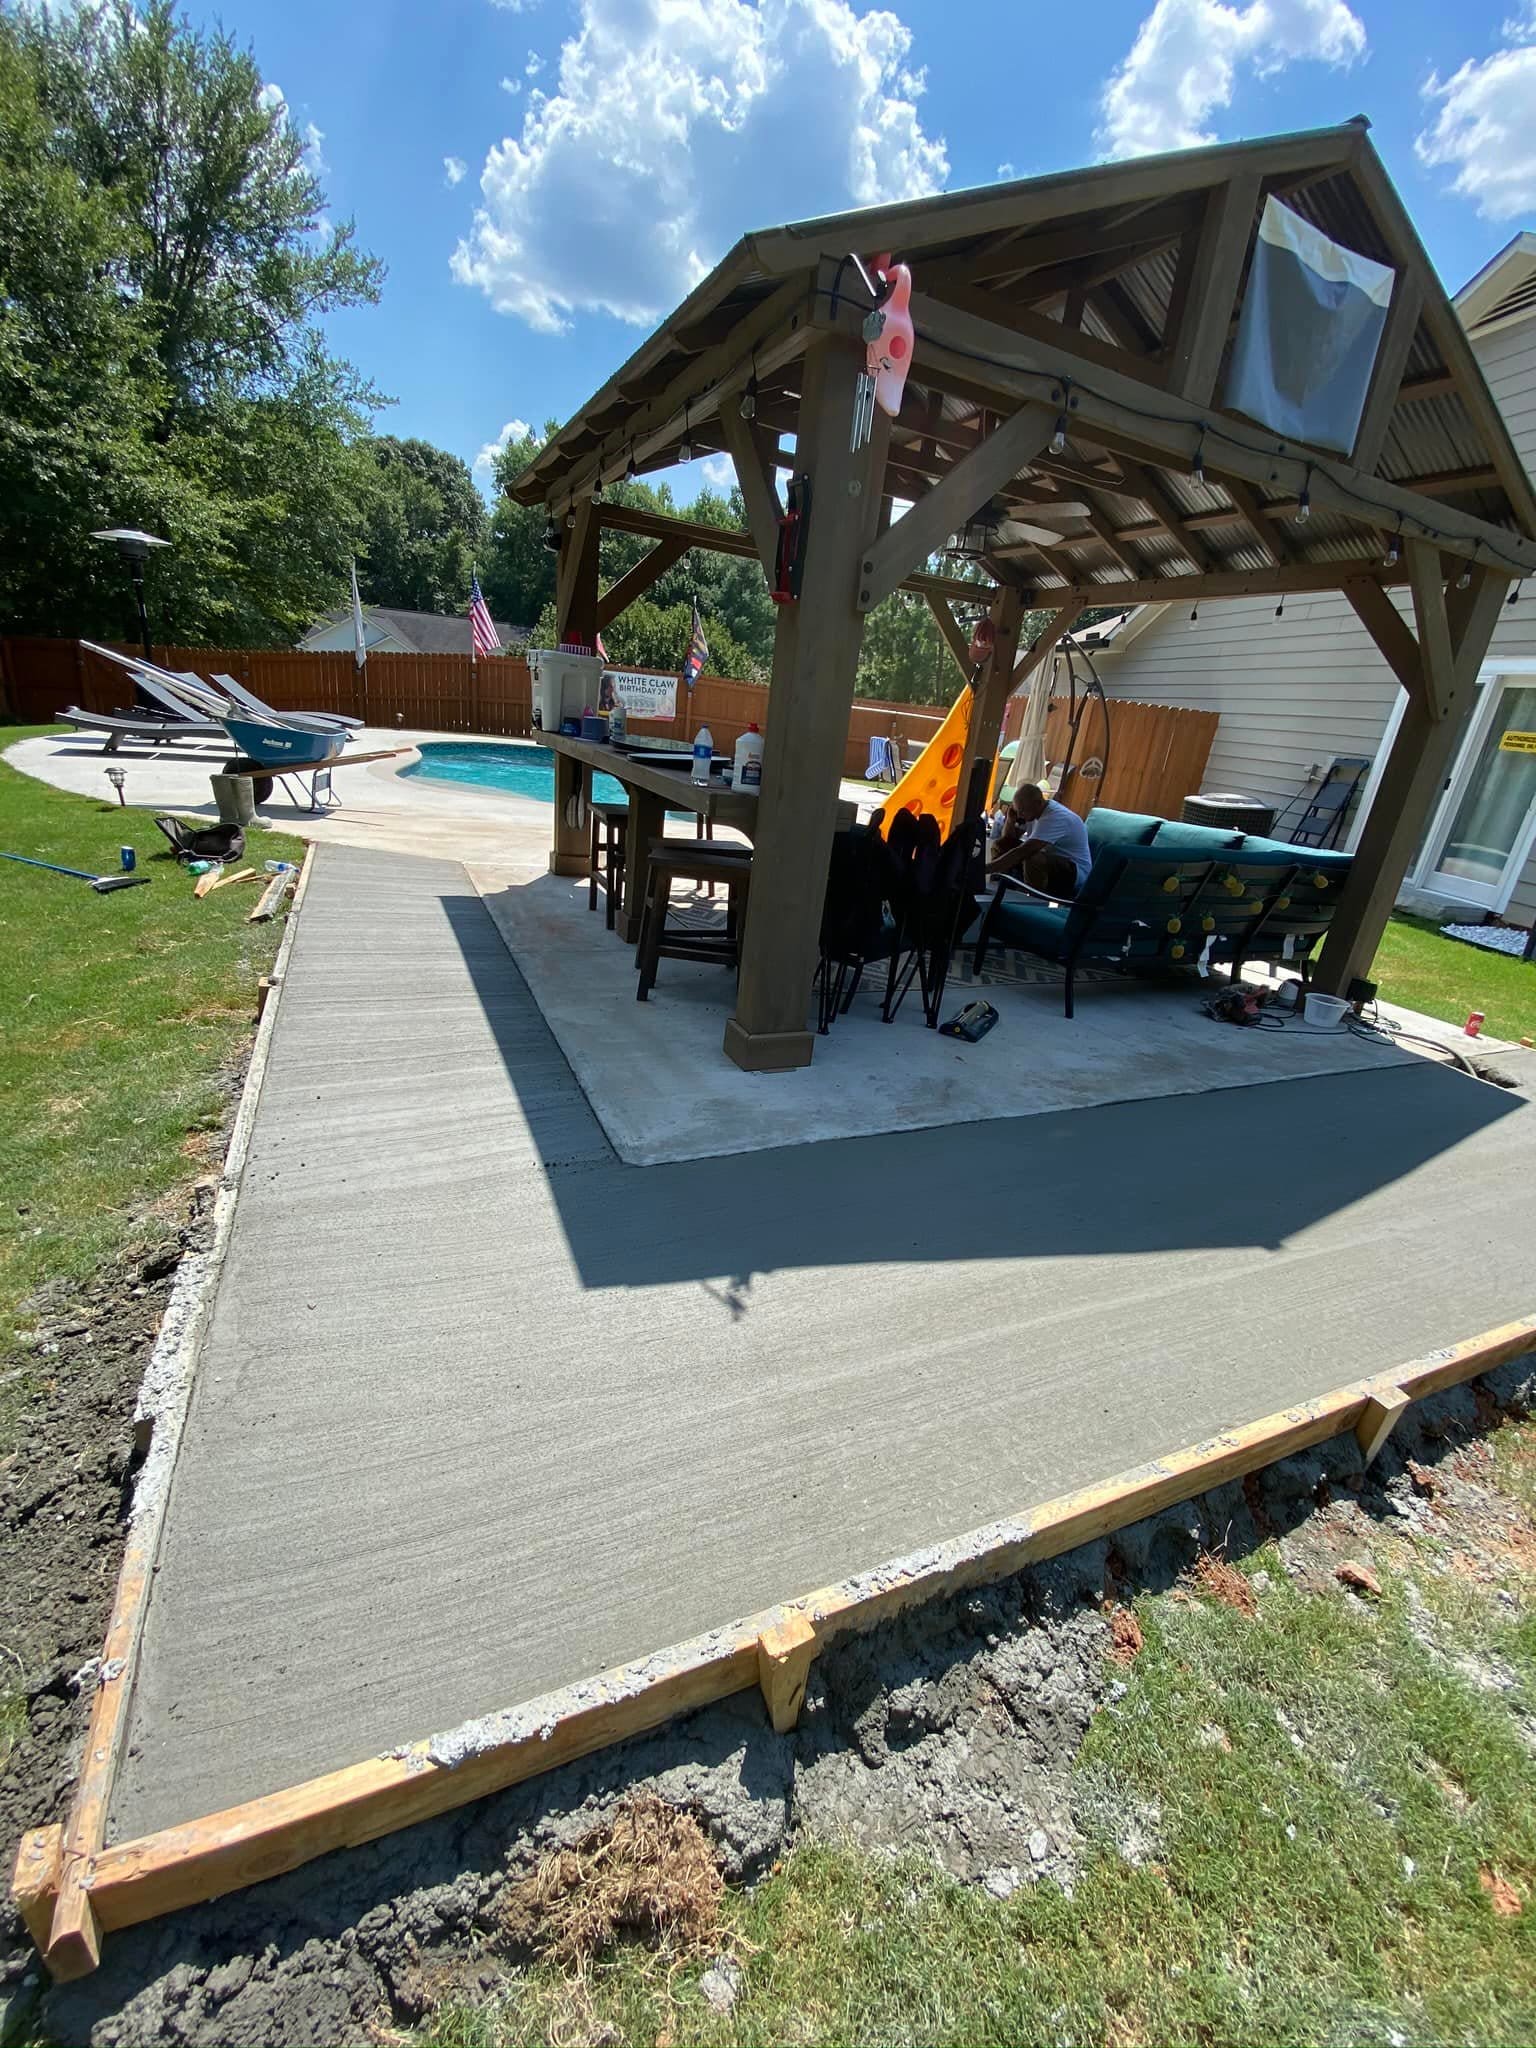 An outdoor living concrete patio extension poured by Multiple Personnel Company in northeast GA